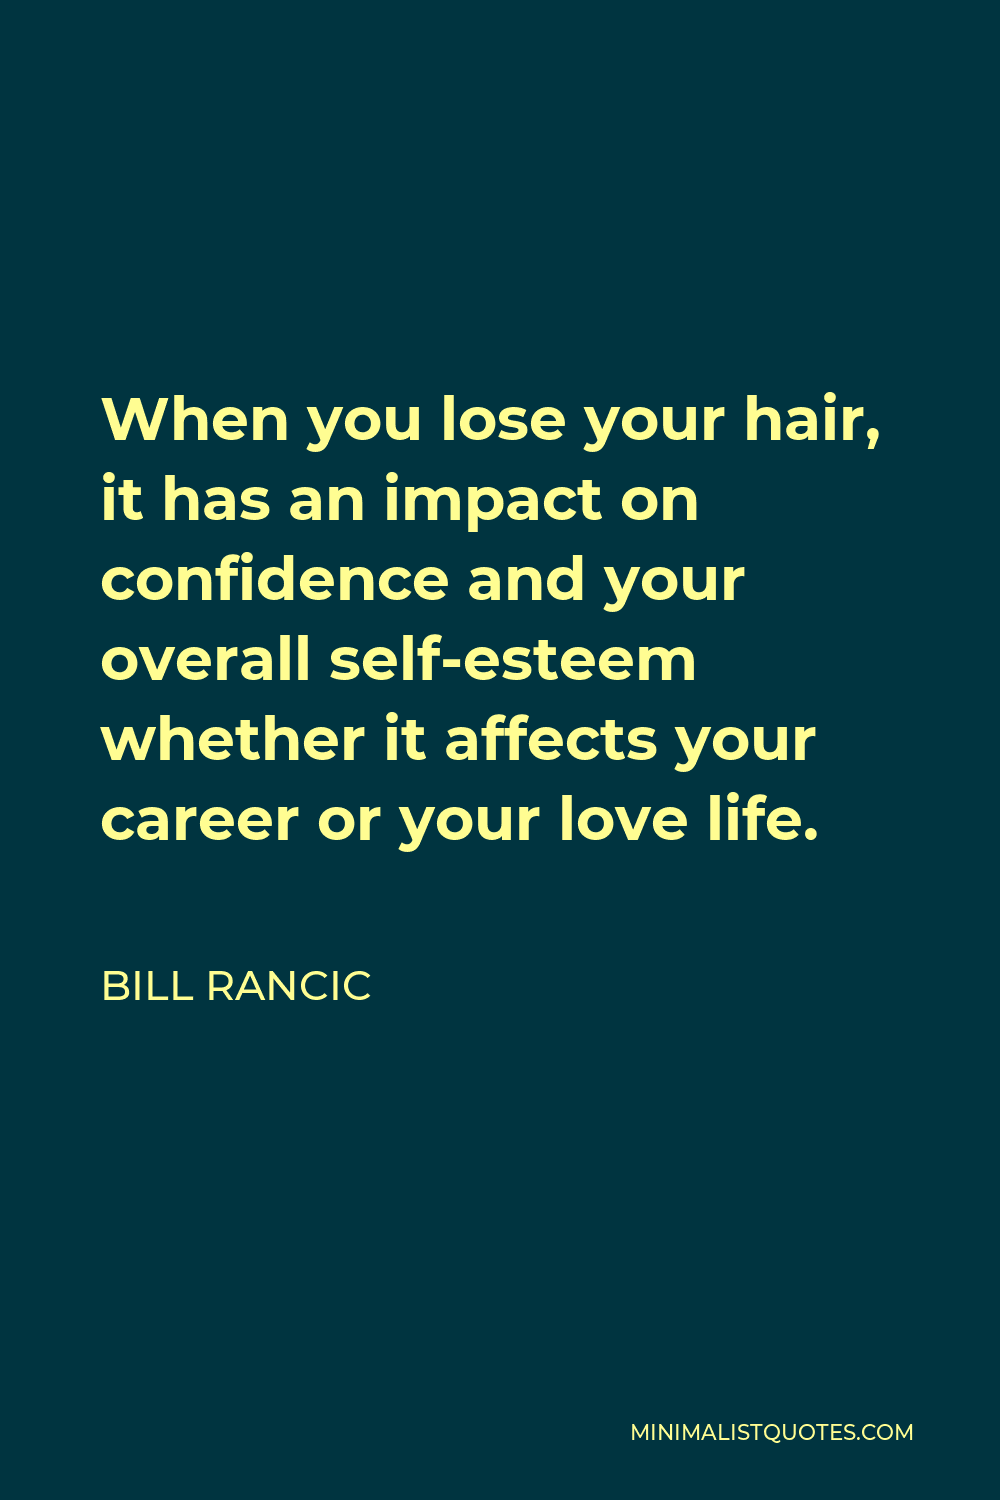 Bill Rancic Quote - When you lose your hair, it has an impact on confidence and your overall self-esteem whether it affects your career or your love life.